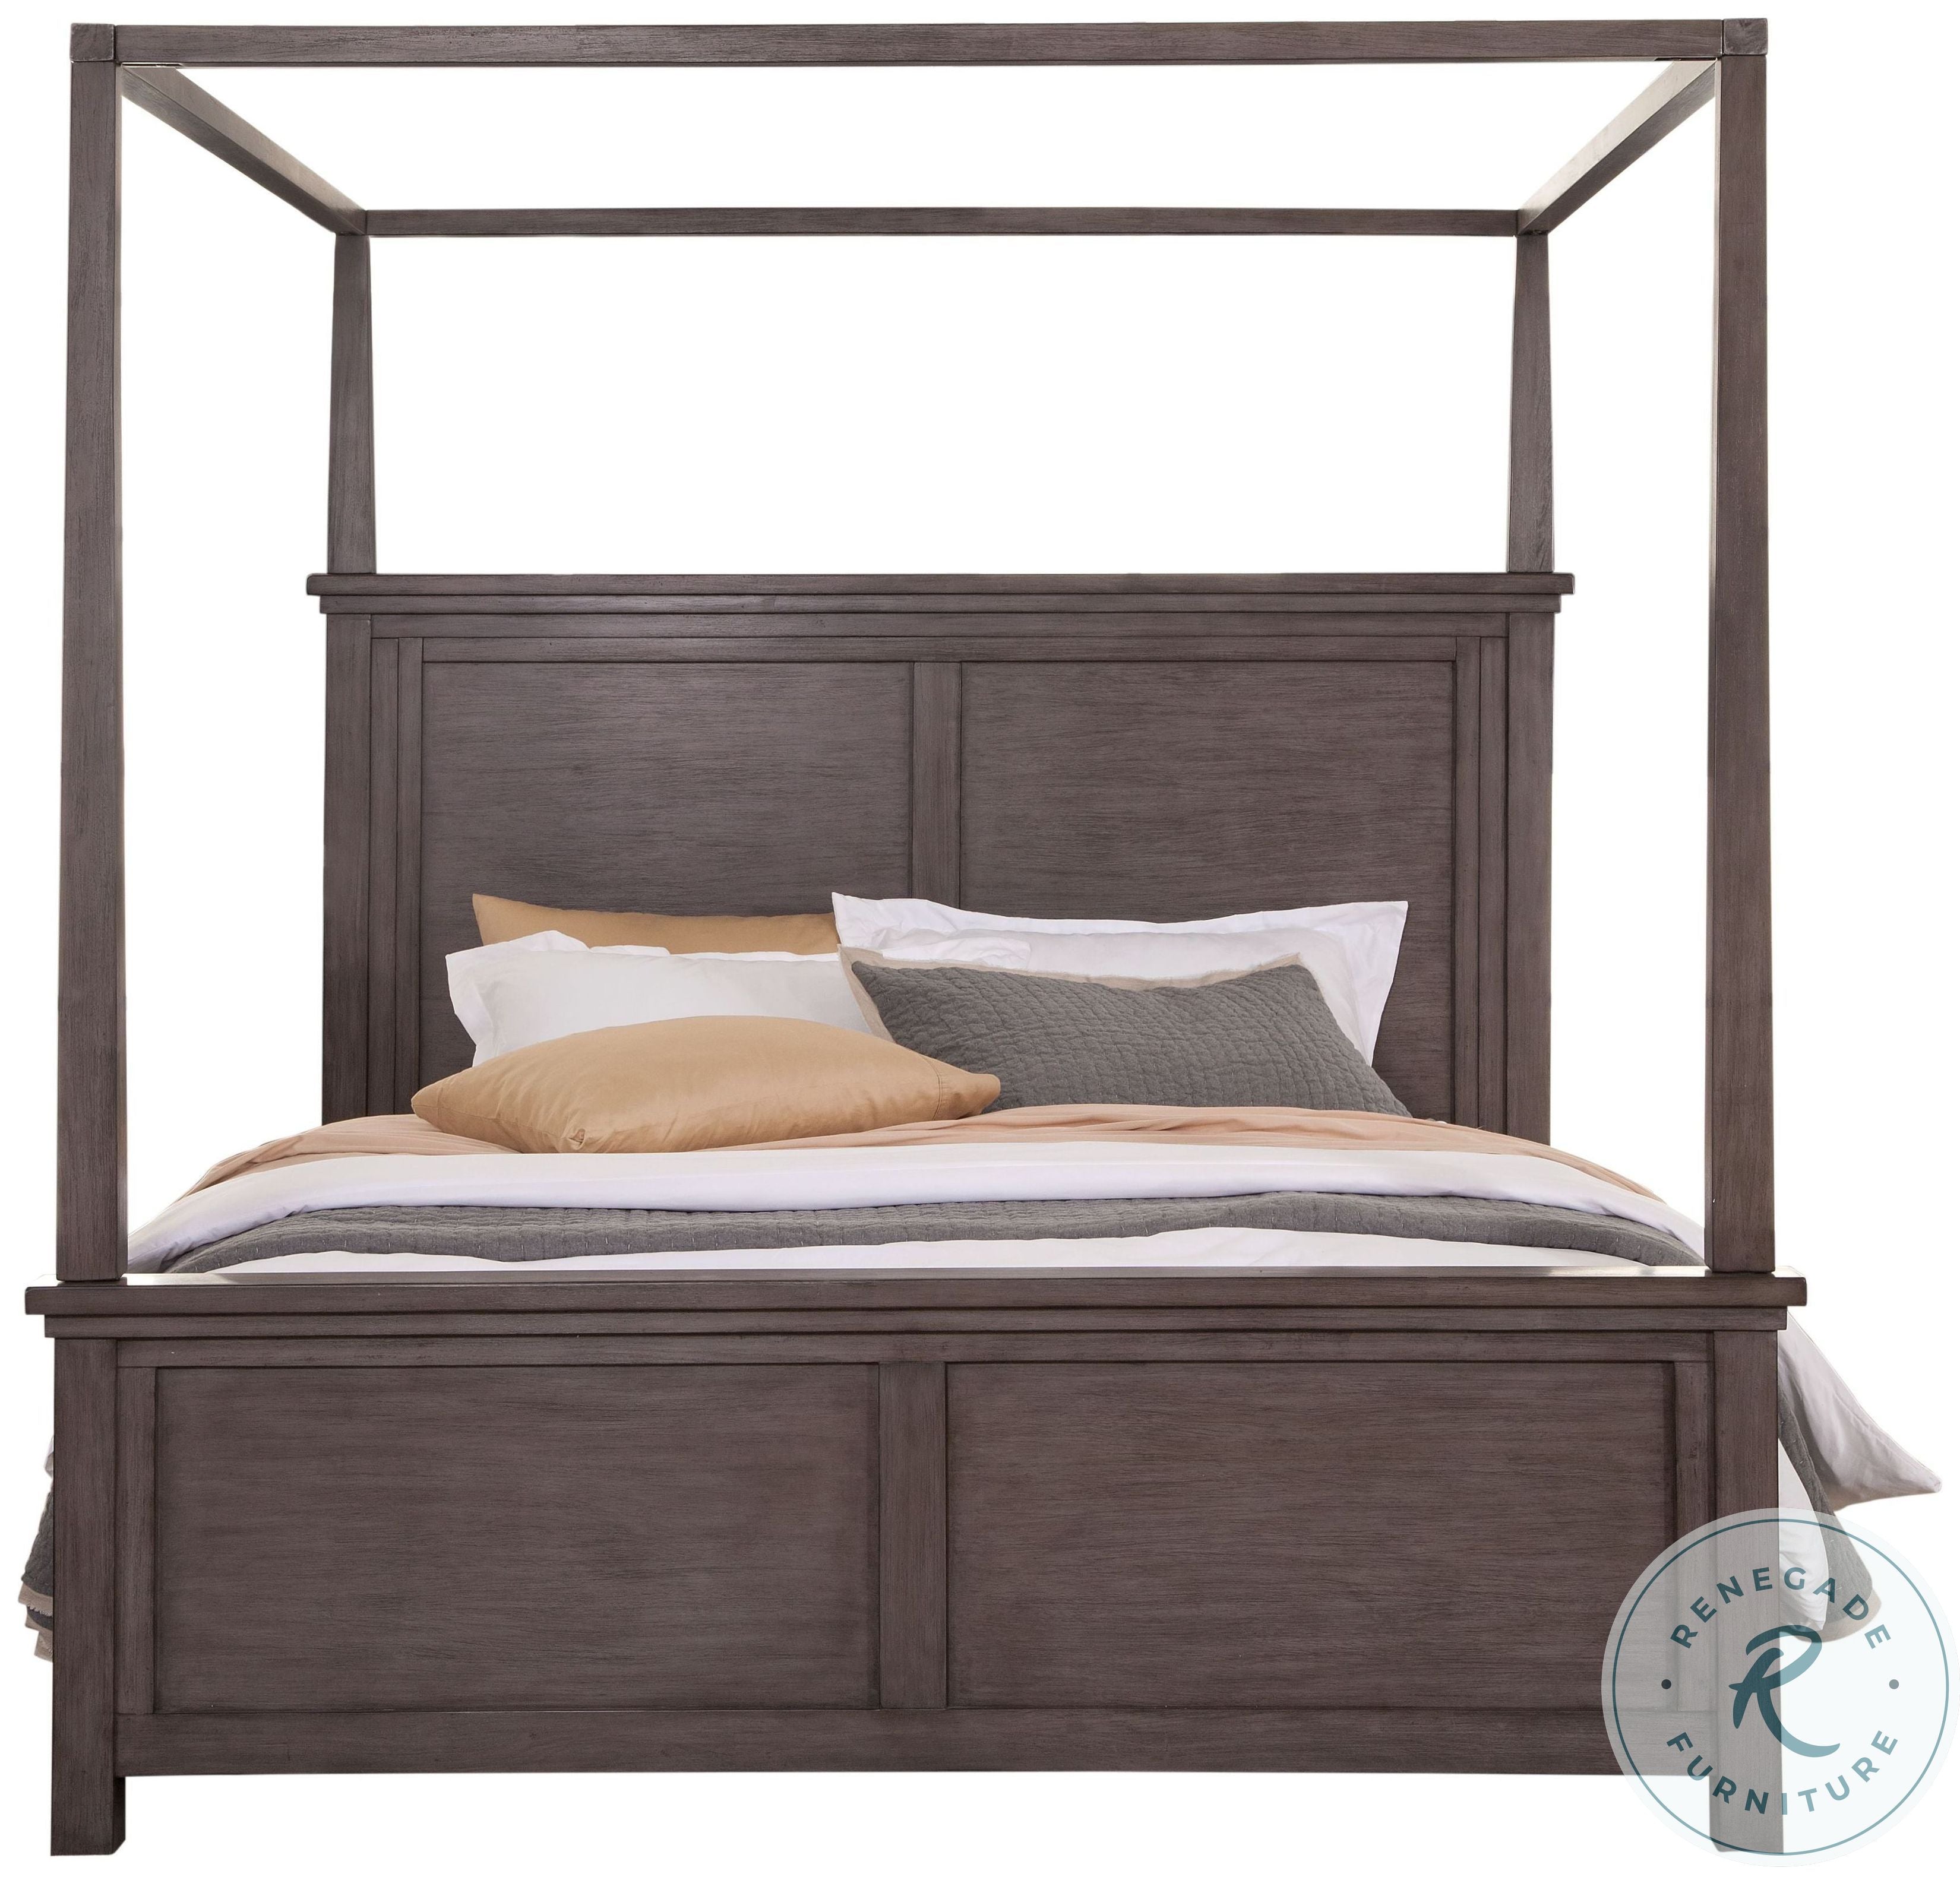 Modern Farmhouse Distressed Light Gray King Canopy Bed by Avalon Furniture